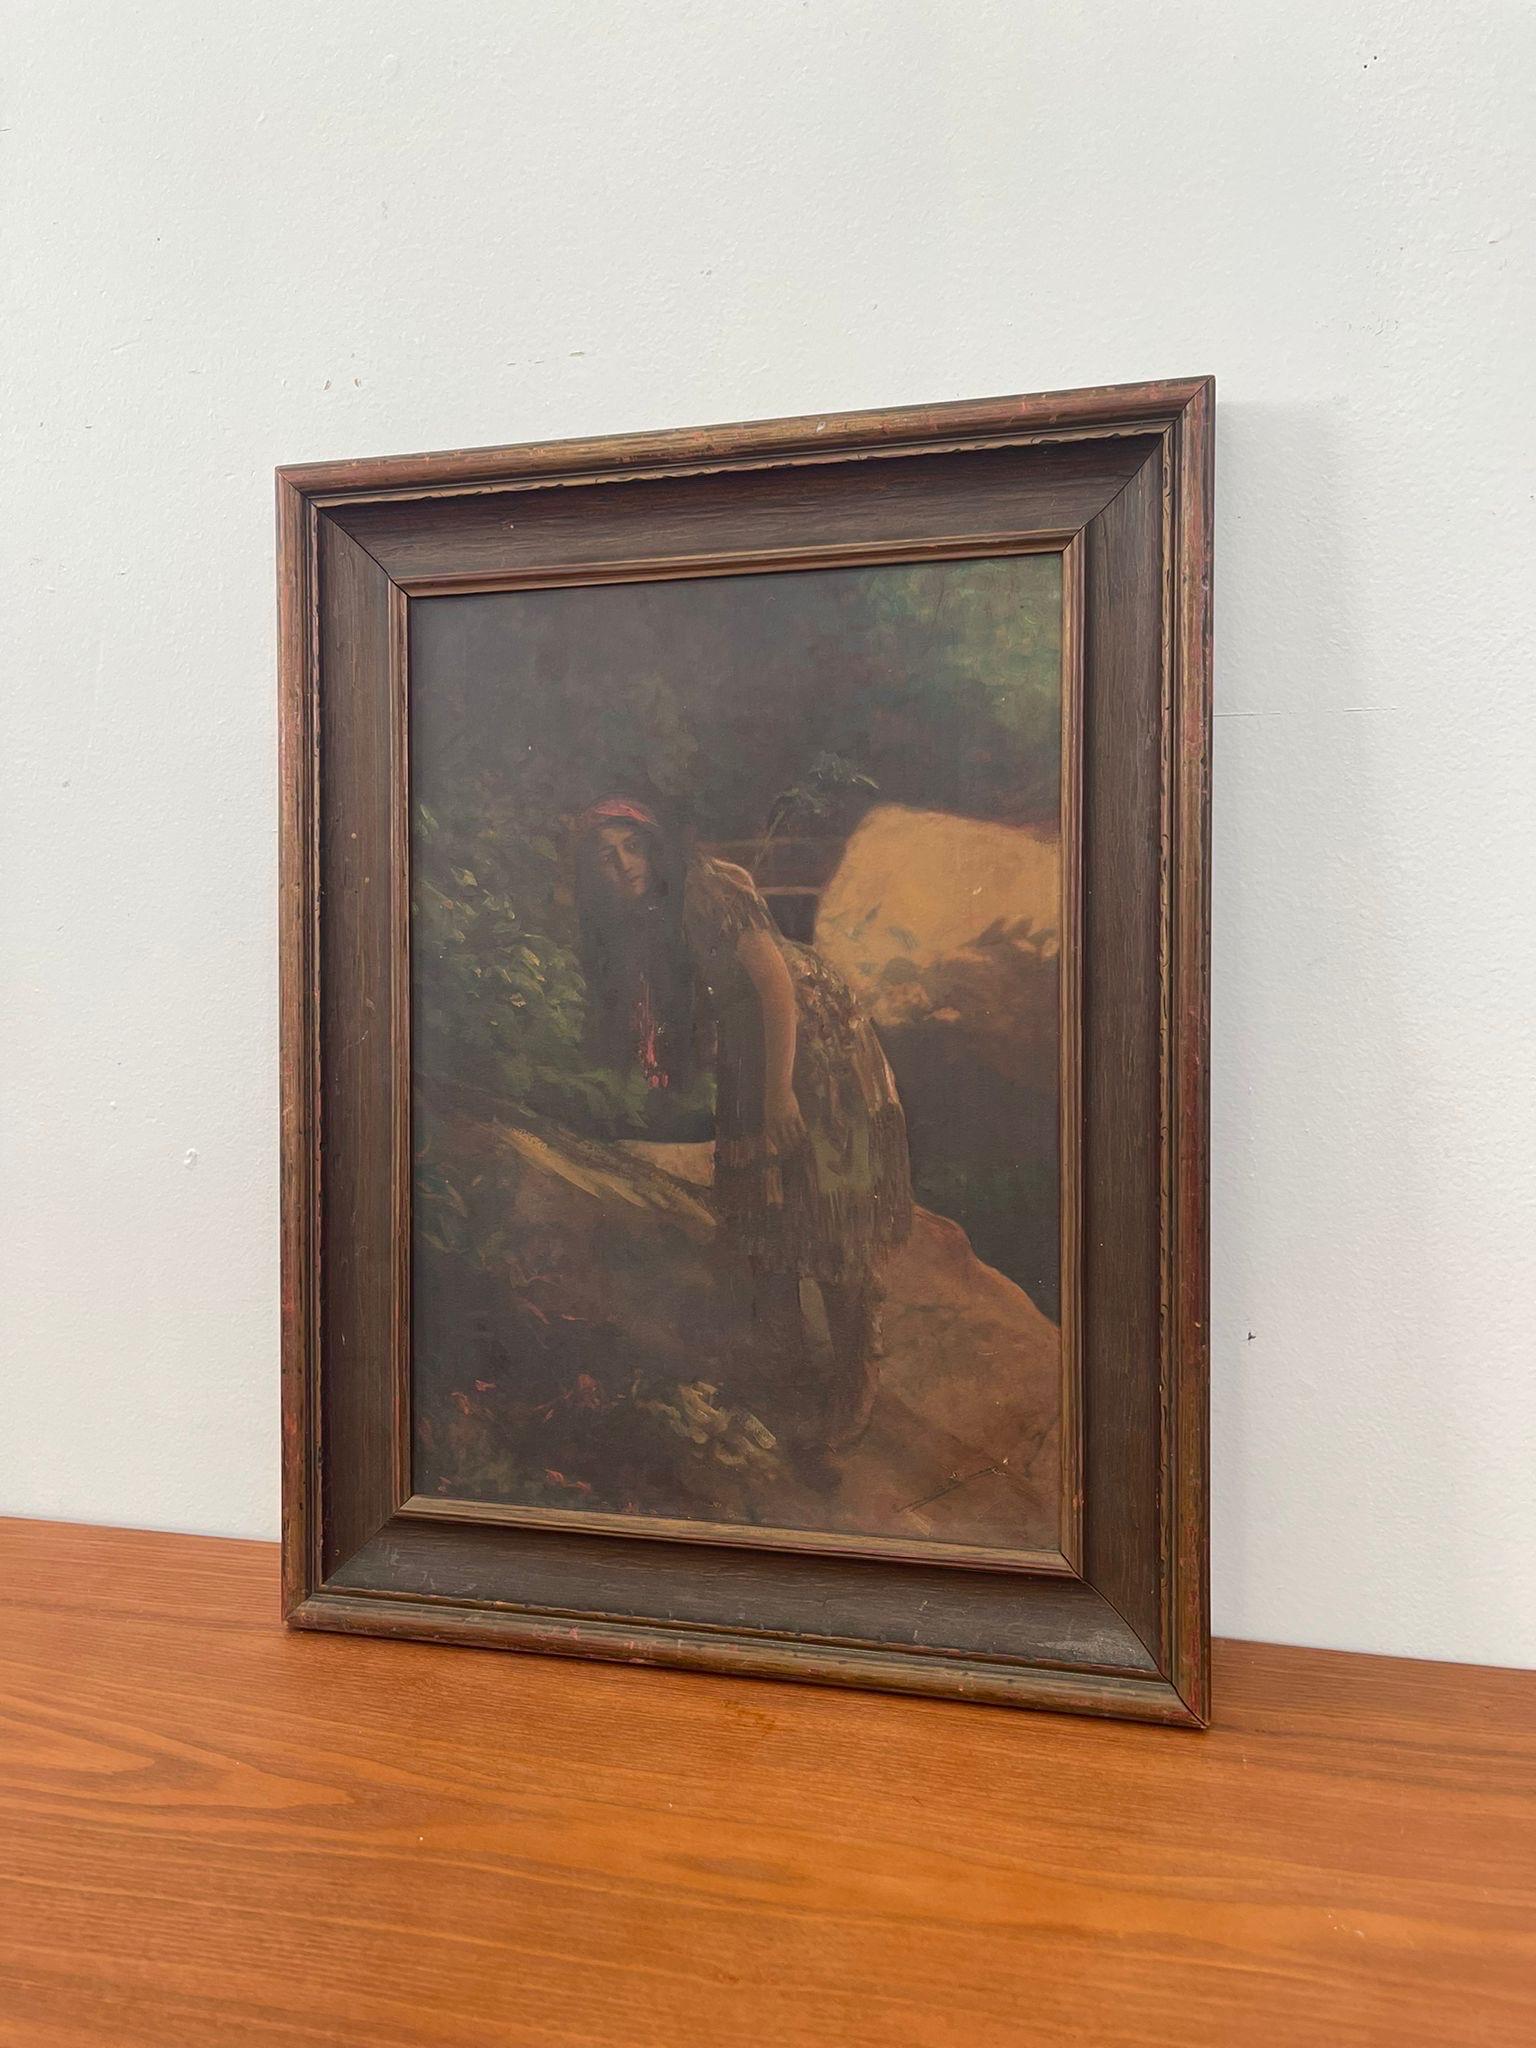 Approximately Circa 1925. Beautiful Petina on the Art, as well as the Frame. Vintage Condition Consistent with Age as Pictured.

Dimensions. 16 1/2 W ; 1 D ; 21 H